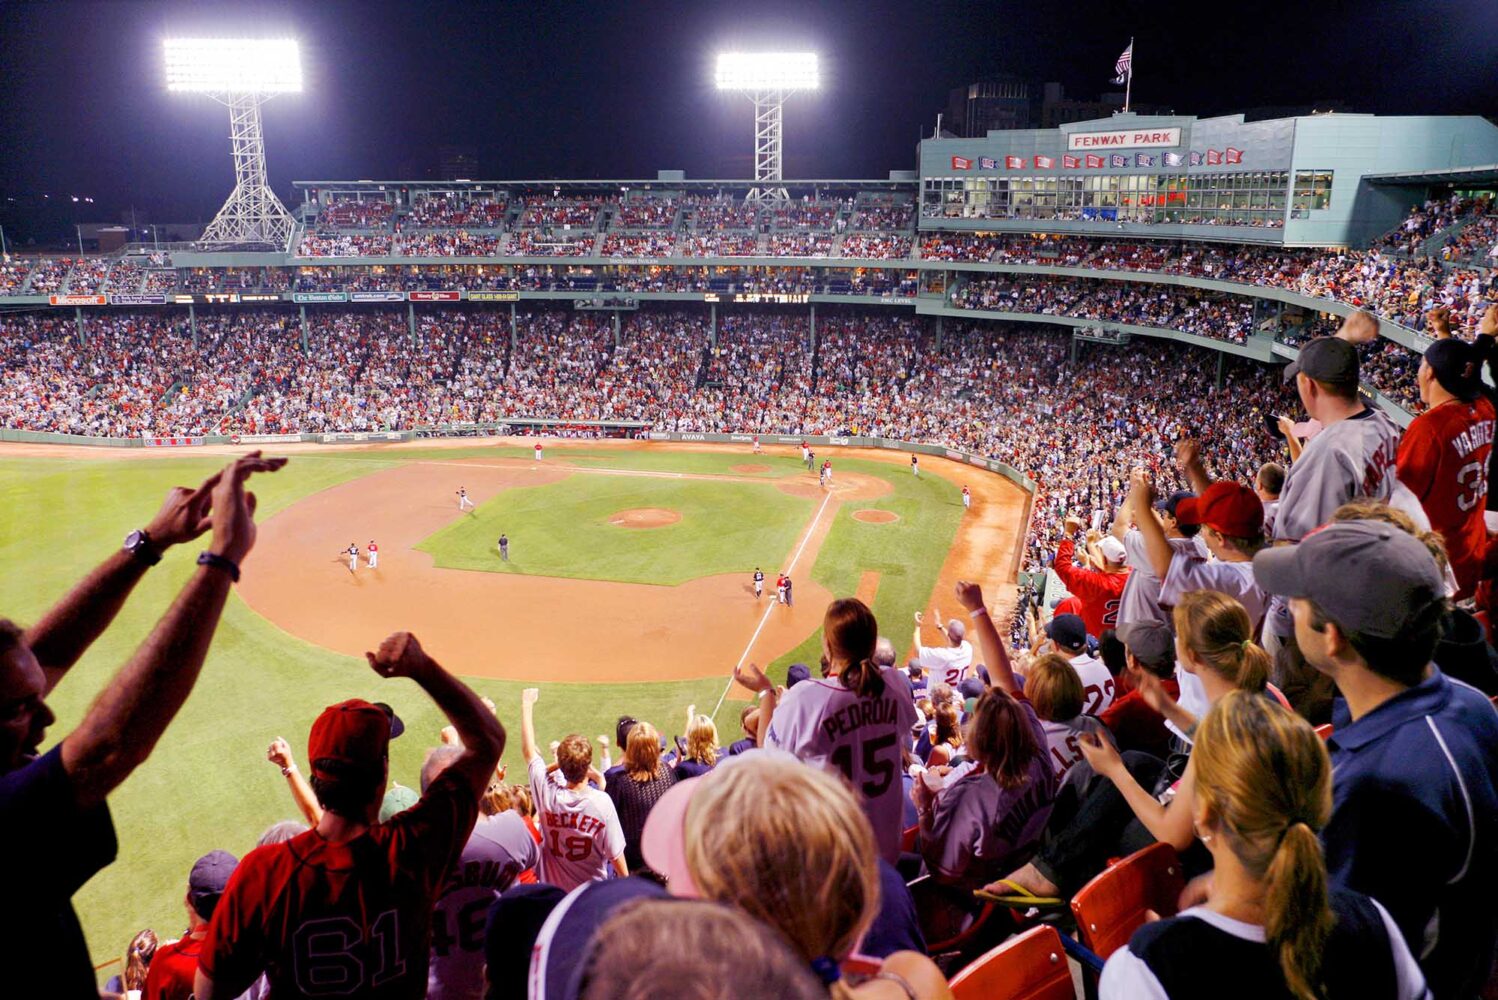 Photo: A wide shot of fans cheering at a game at Fenway stadium.